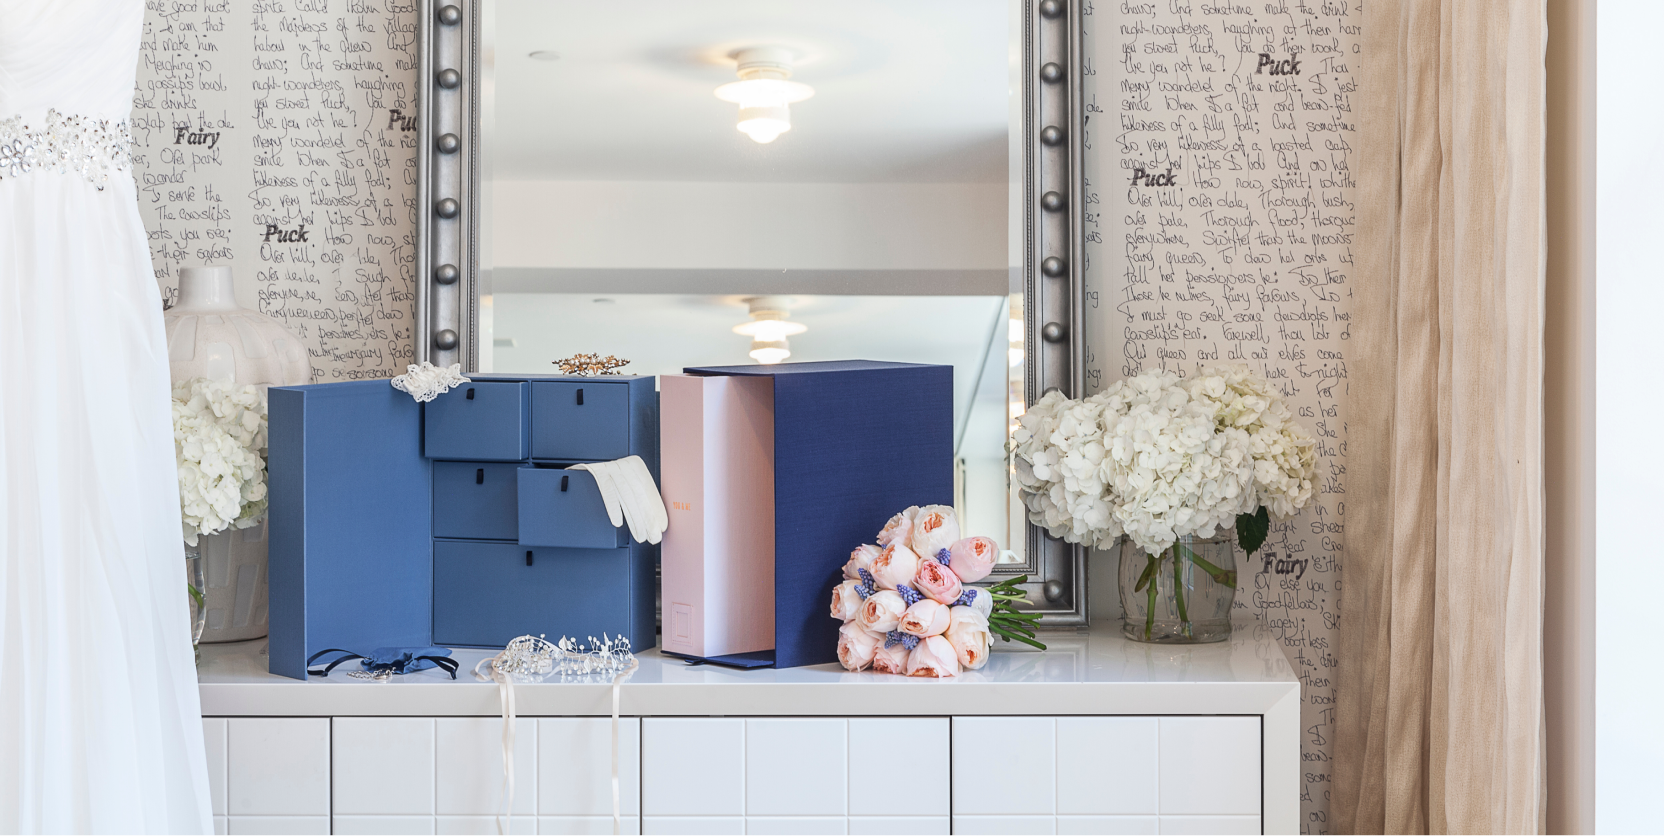 Blue organization boxes from wedding collection over a countertop decorated with flowers and bride items.